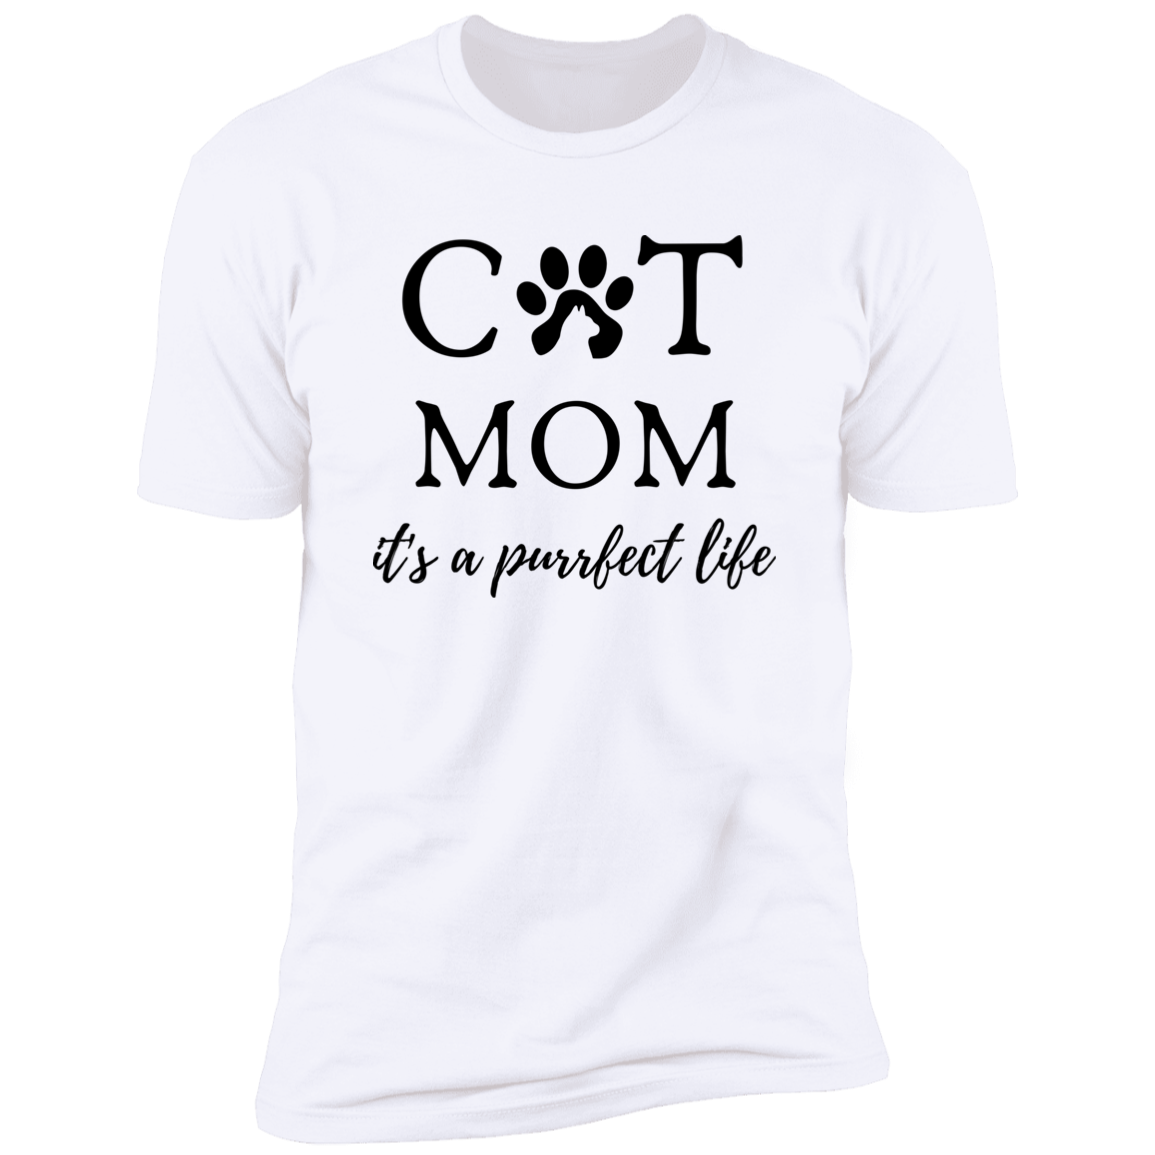 Cat Mom It's a Purrfect Life T-shirt, Cat Mom Shirt for humans, in whiter